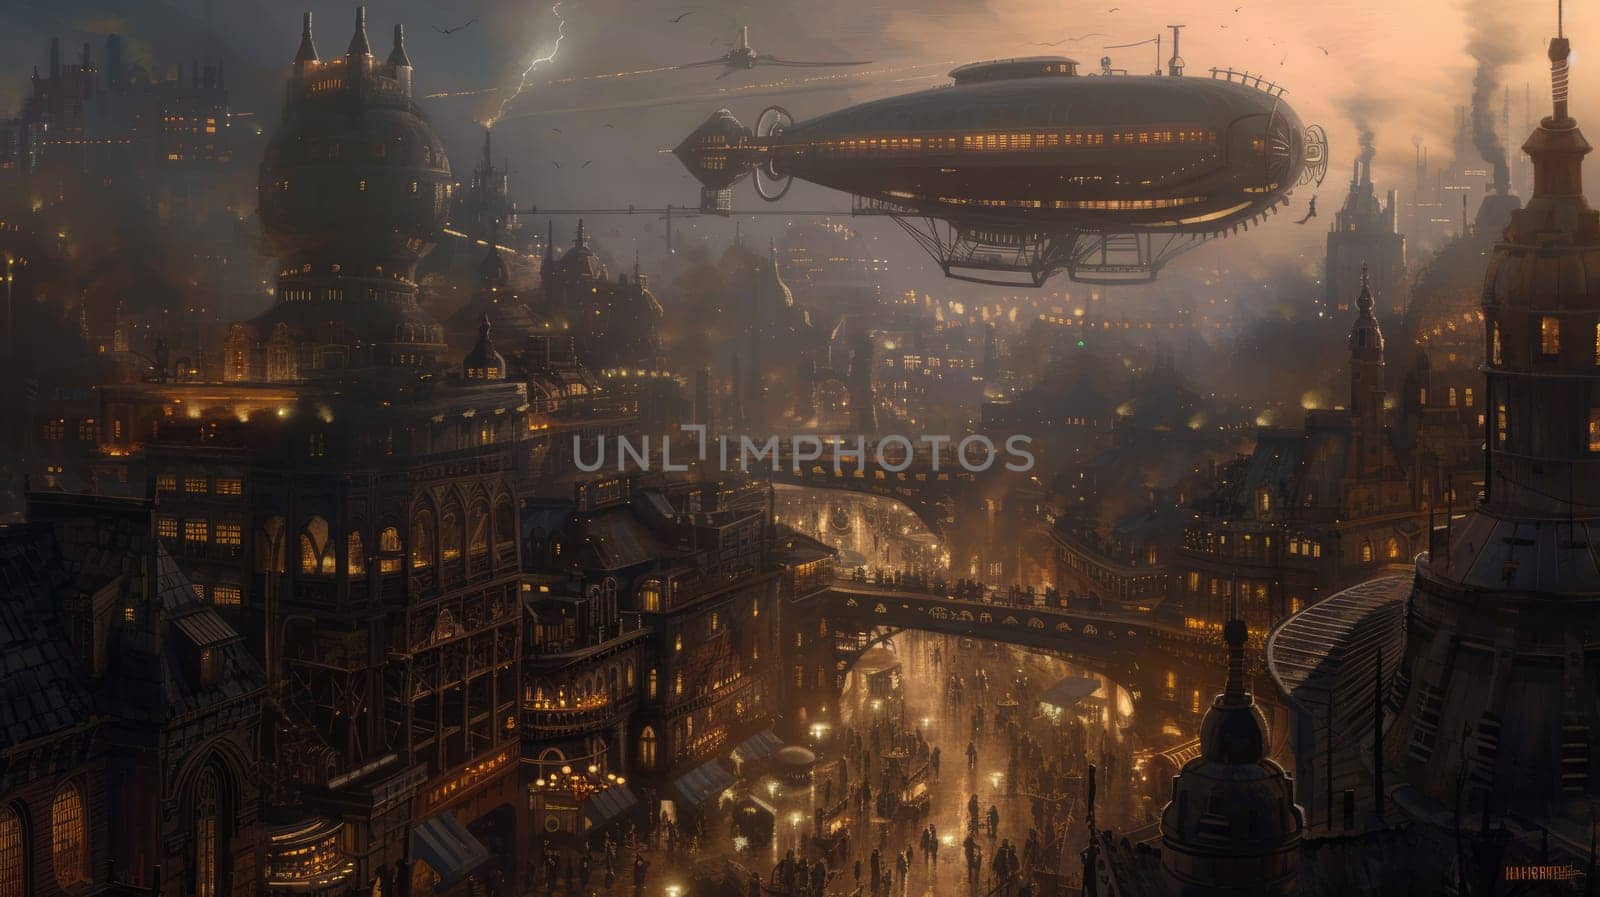 Steampunk Airships Over a Victorian Cityscape. Resplendent. by biancoblue